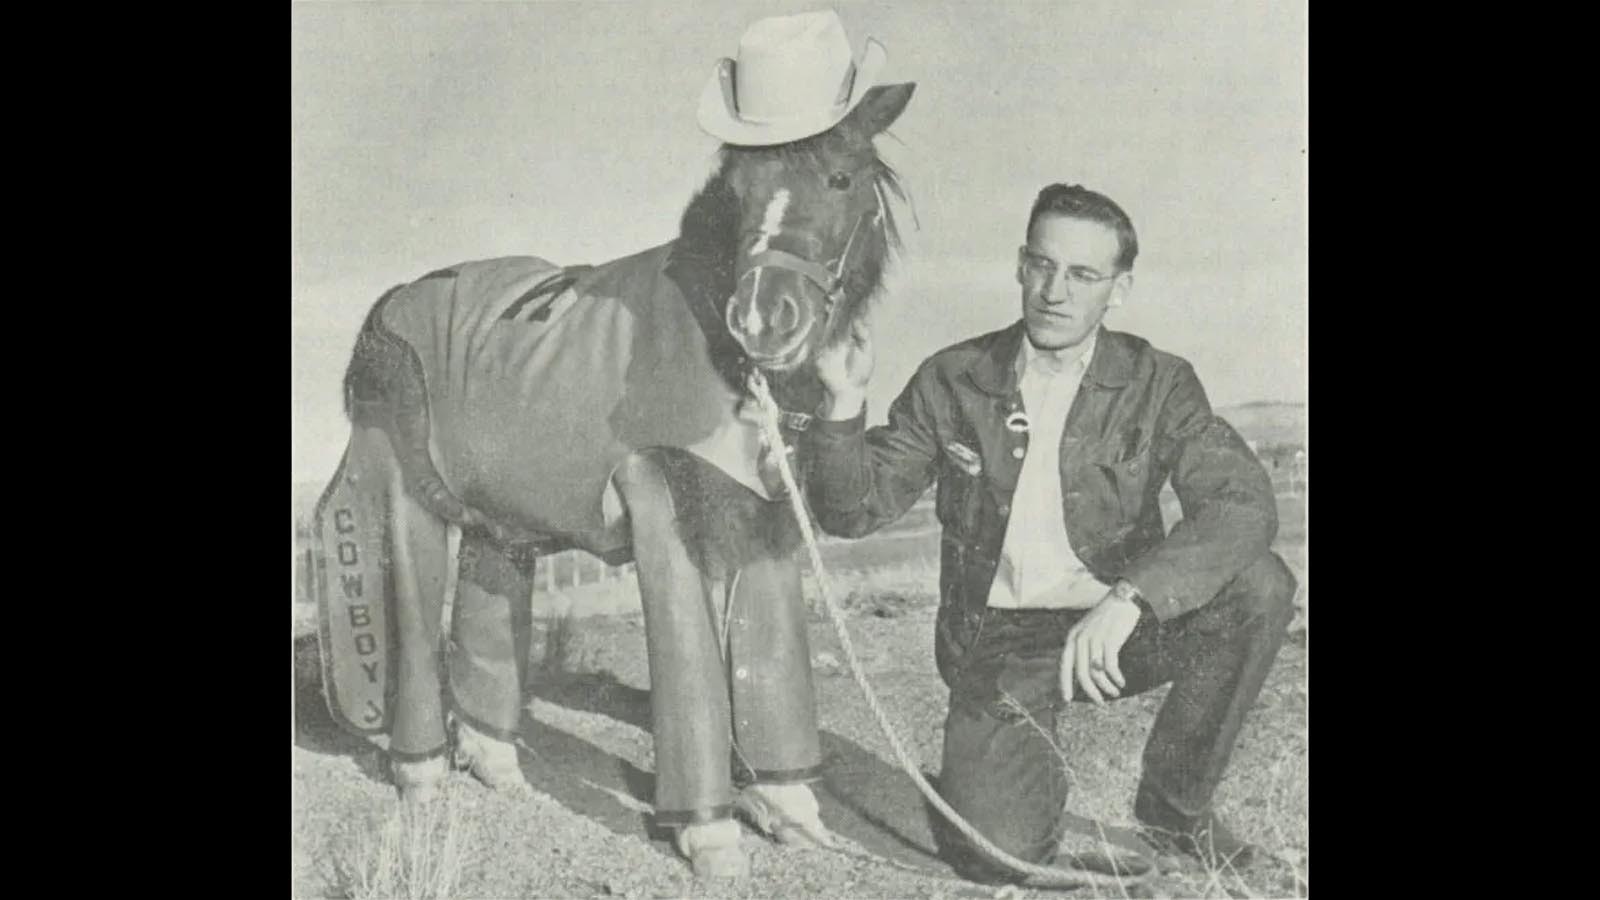 Cowboy Joe and one of his handlers March 1951.